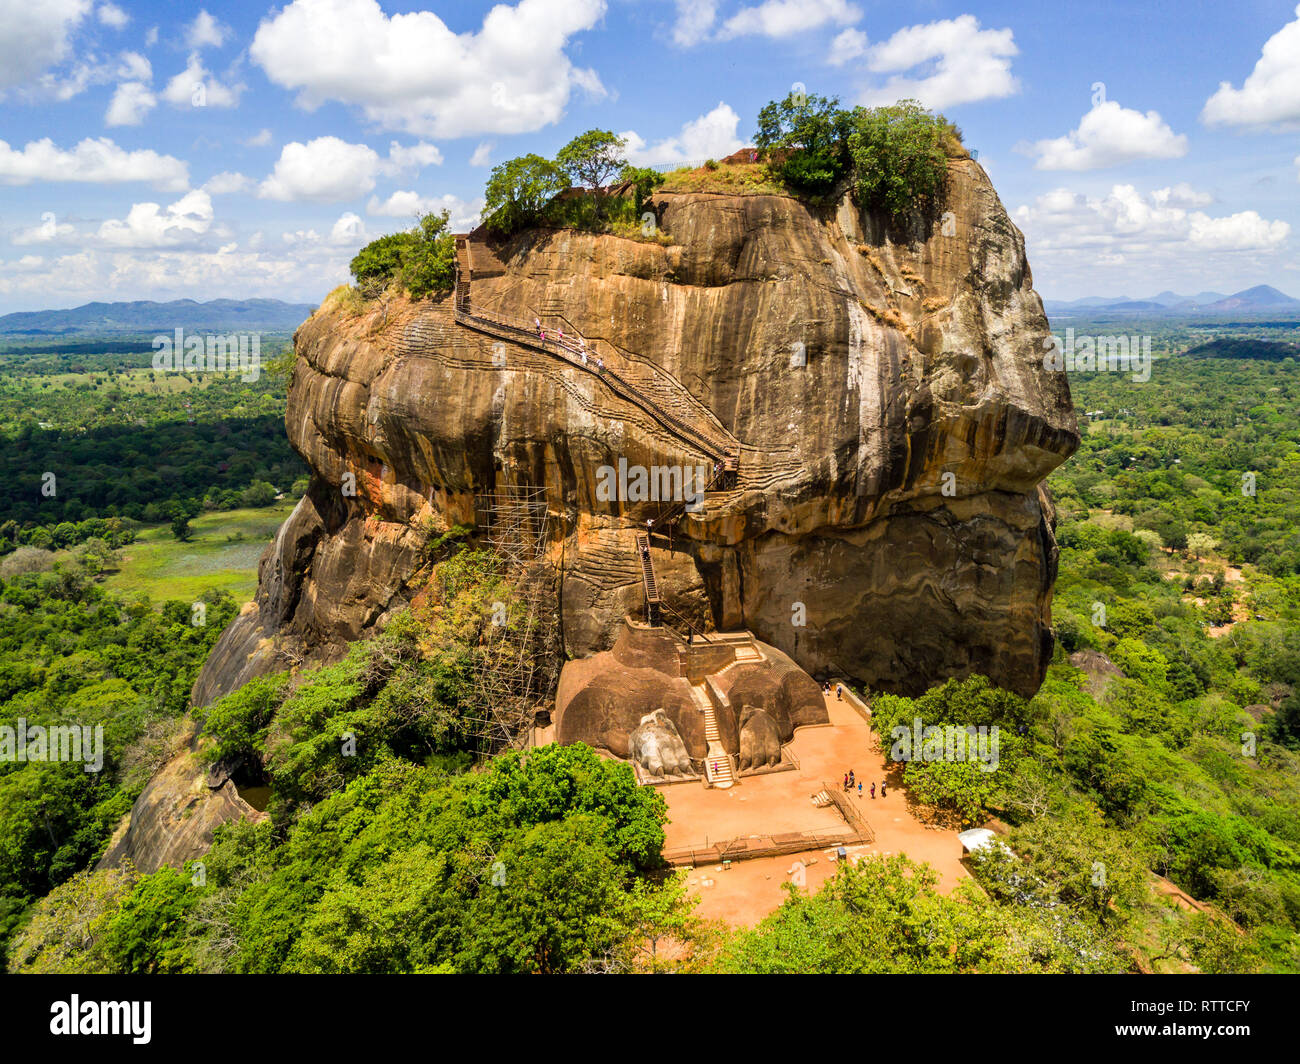 Sigiriya Or The Lion Rock An Ancient Fortress And A Palace With Gardens Pools And Terraces Atop Of Granite Rock In Dambulla Sri Lanka Aerial View Stock Photo Alamy